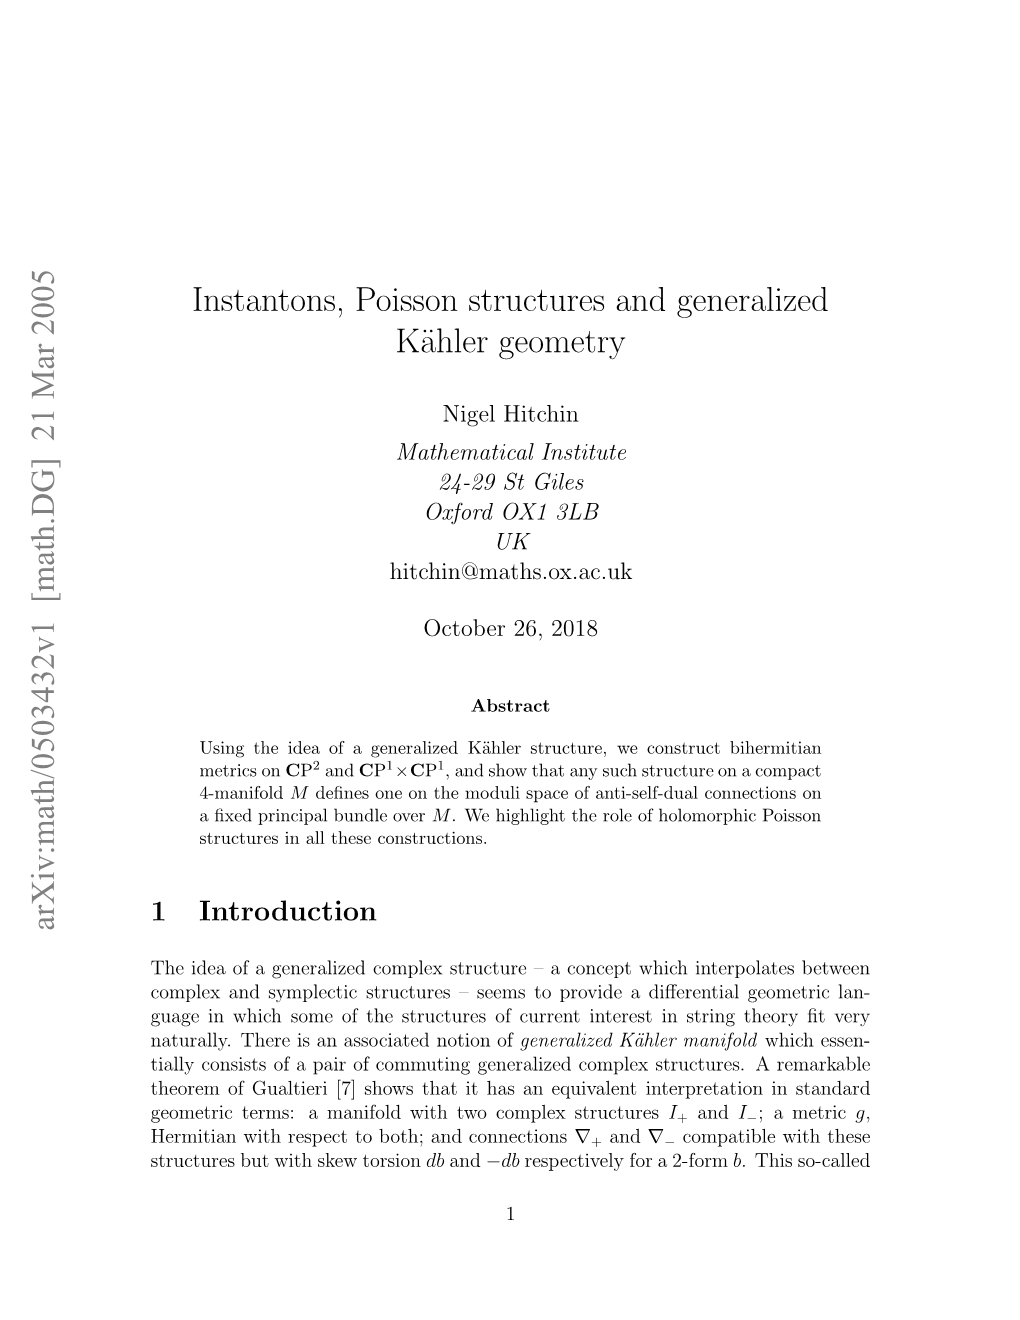 Instantons, Poisson Structures and Generalized Kähler Geometry